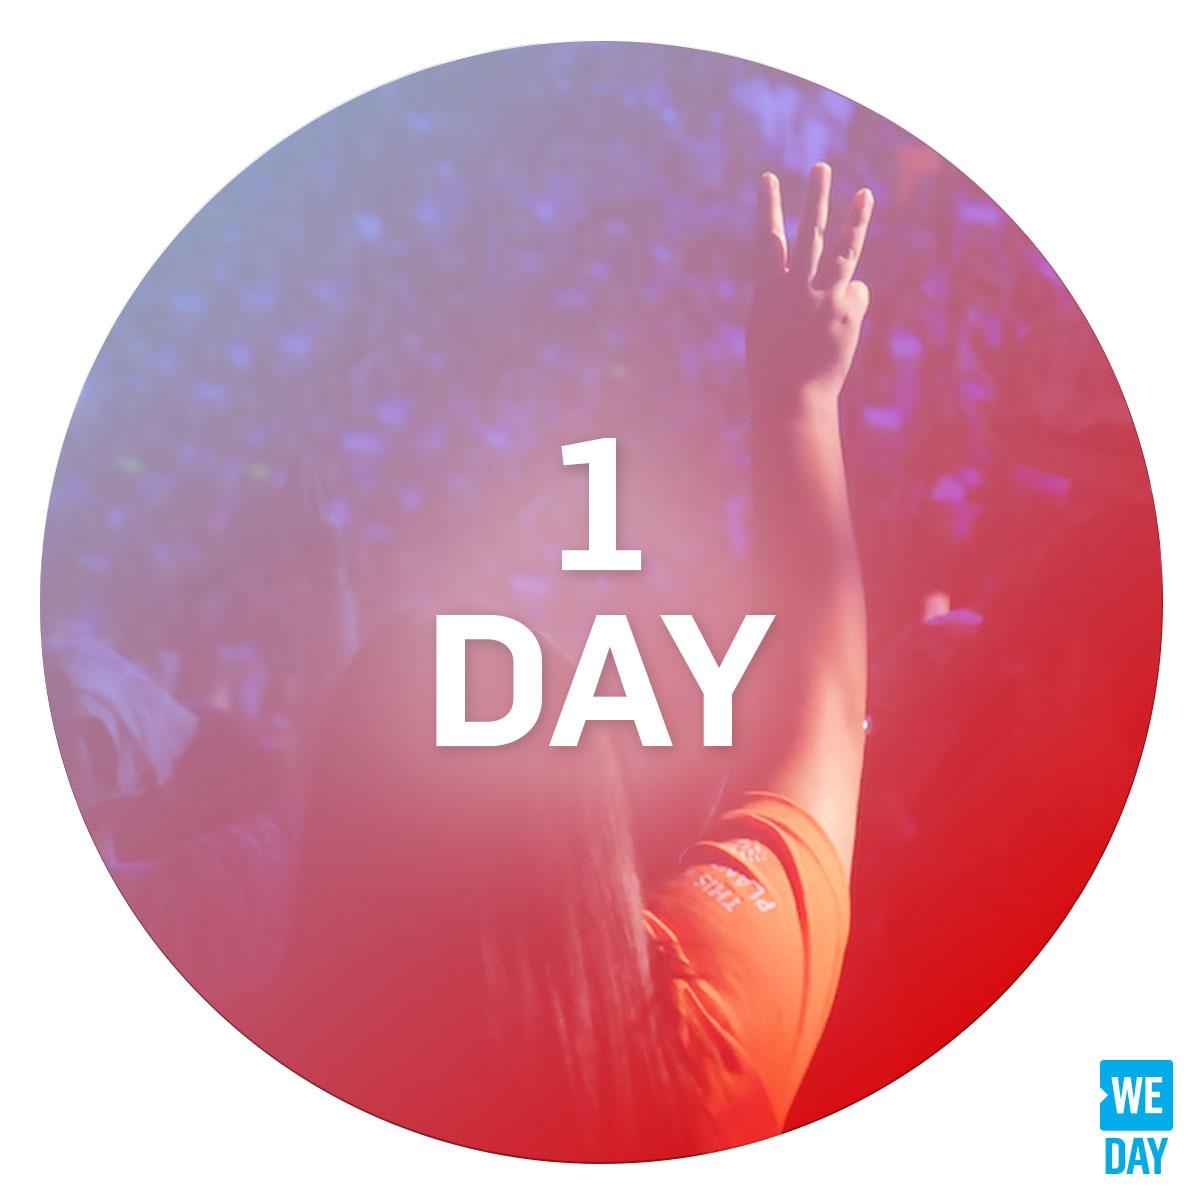 RT @weday: WE CAN'T EVEN HANDLE IT. Tomorrow night #WeDay airs on @ABCNetwork for the first time ever. Who's watching?! http://t.co/yUhOWc6…